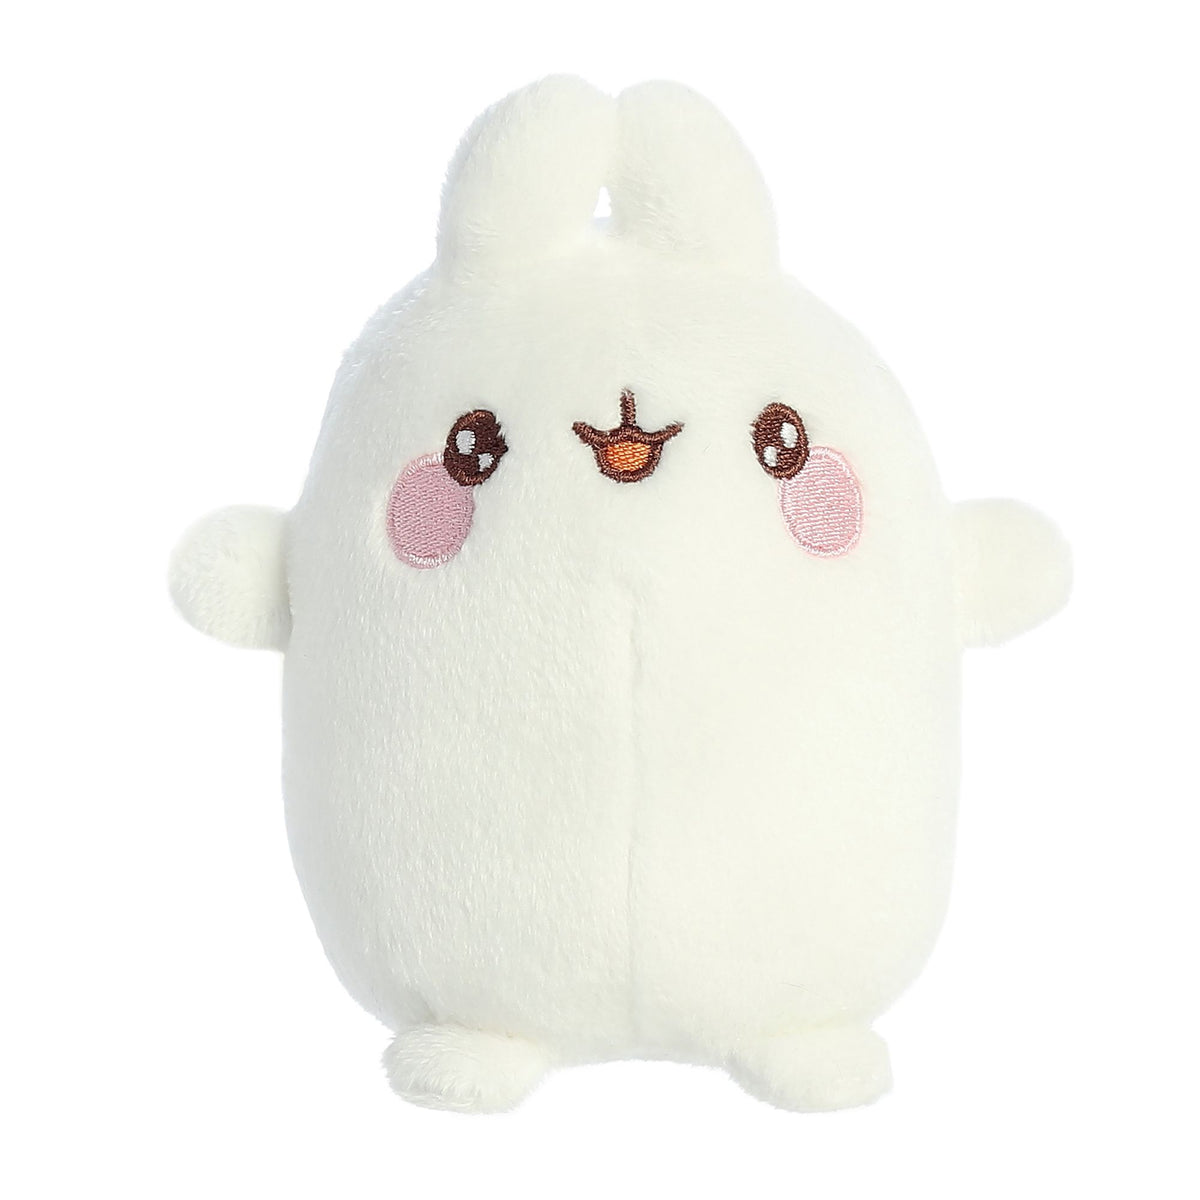 Excited Molang Plush from Molang collection, showcasing a joyful expression and soft texture